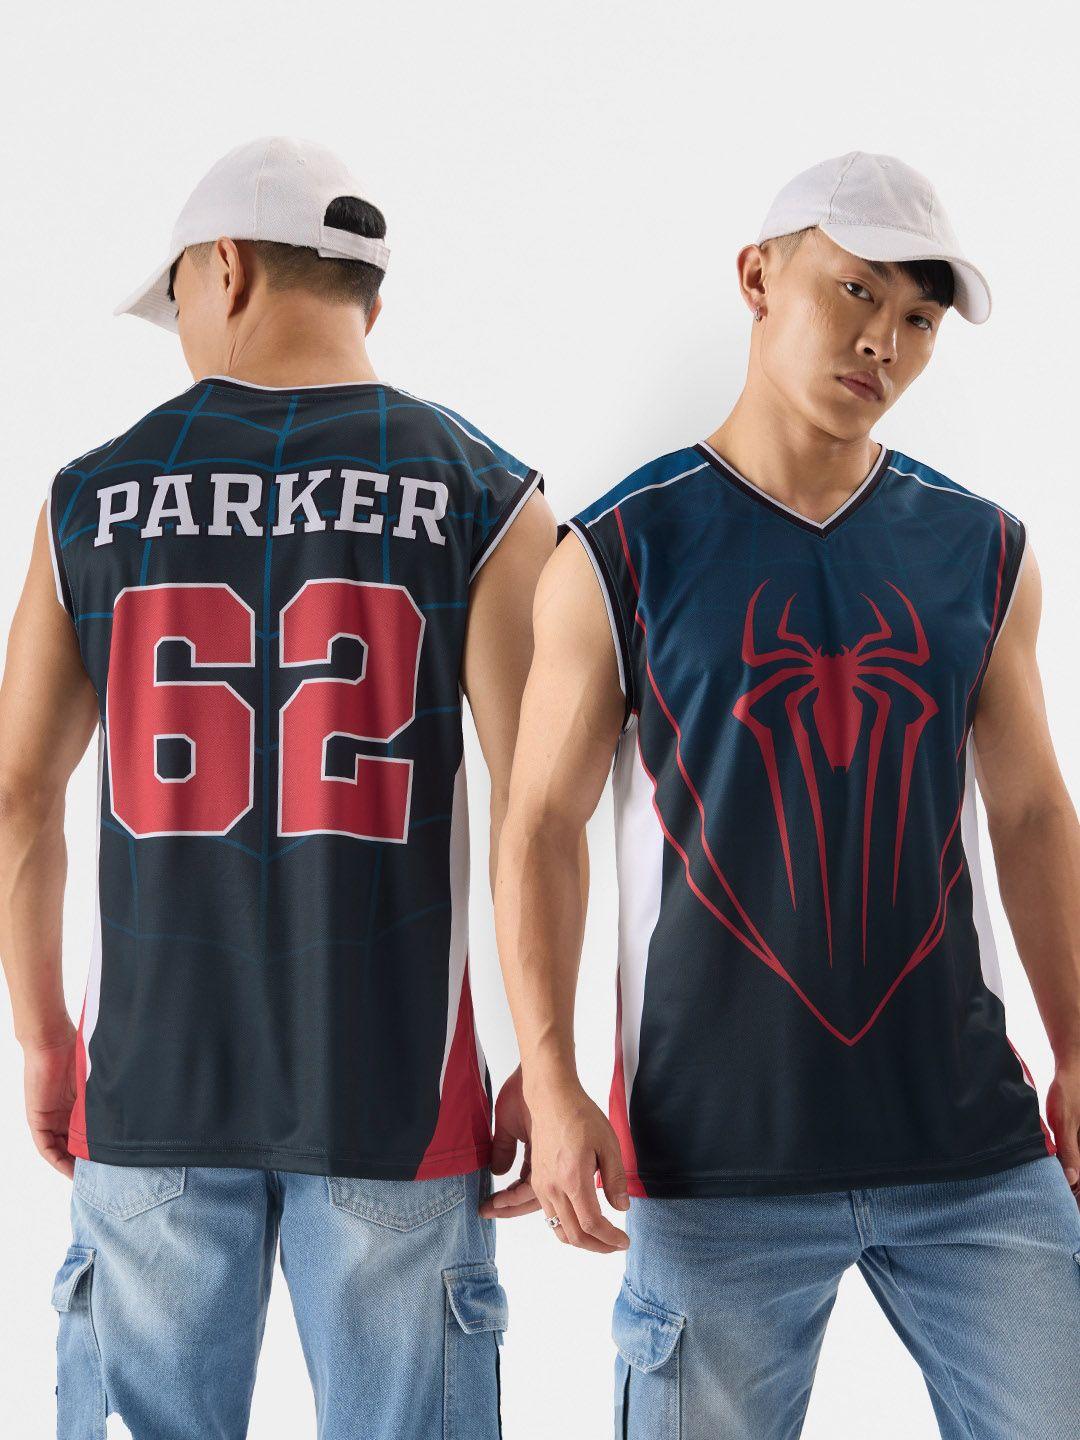 the-souled-store-spider-man-printed-sleeveless-gym-vest